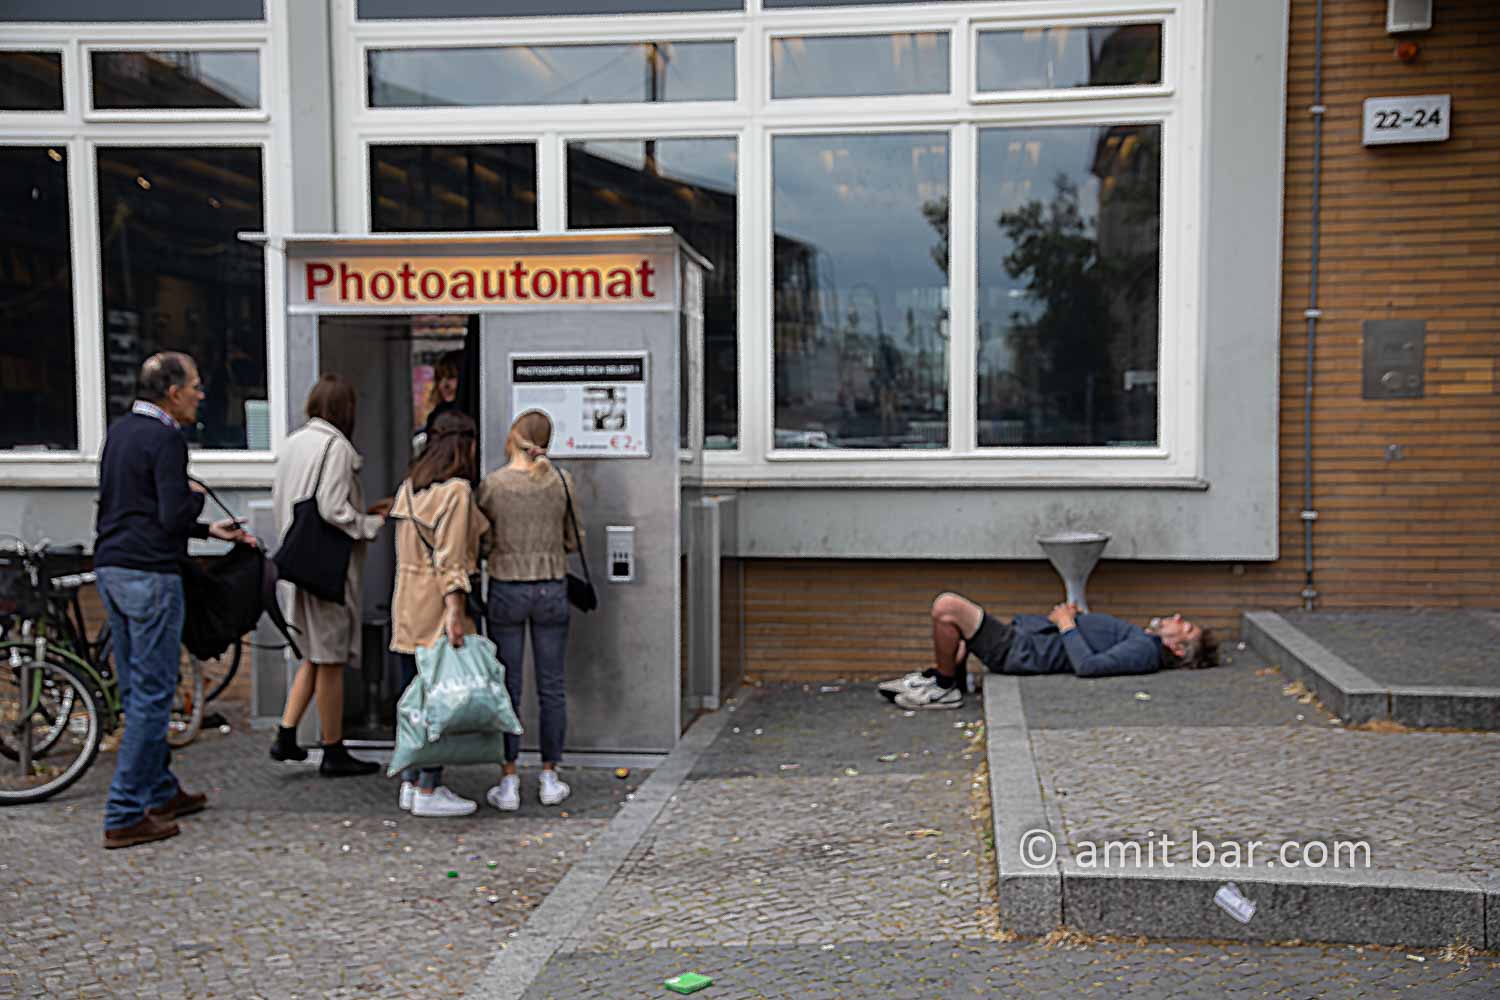 Photoautomat: A runner taking a rest for the benefit of the photo